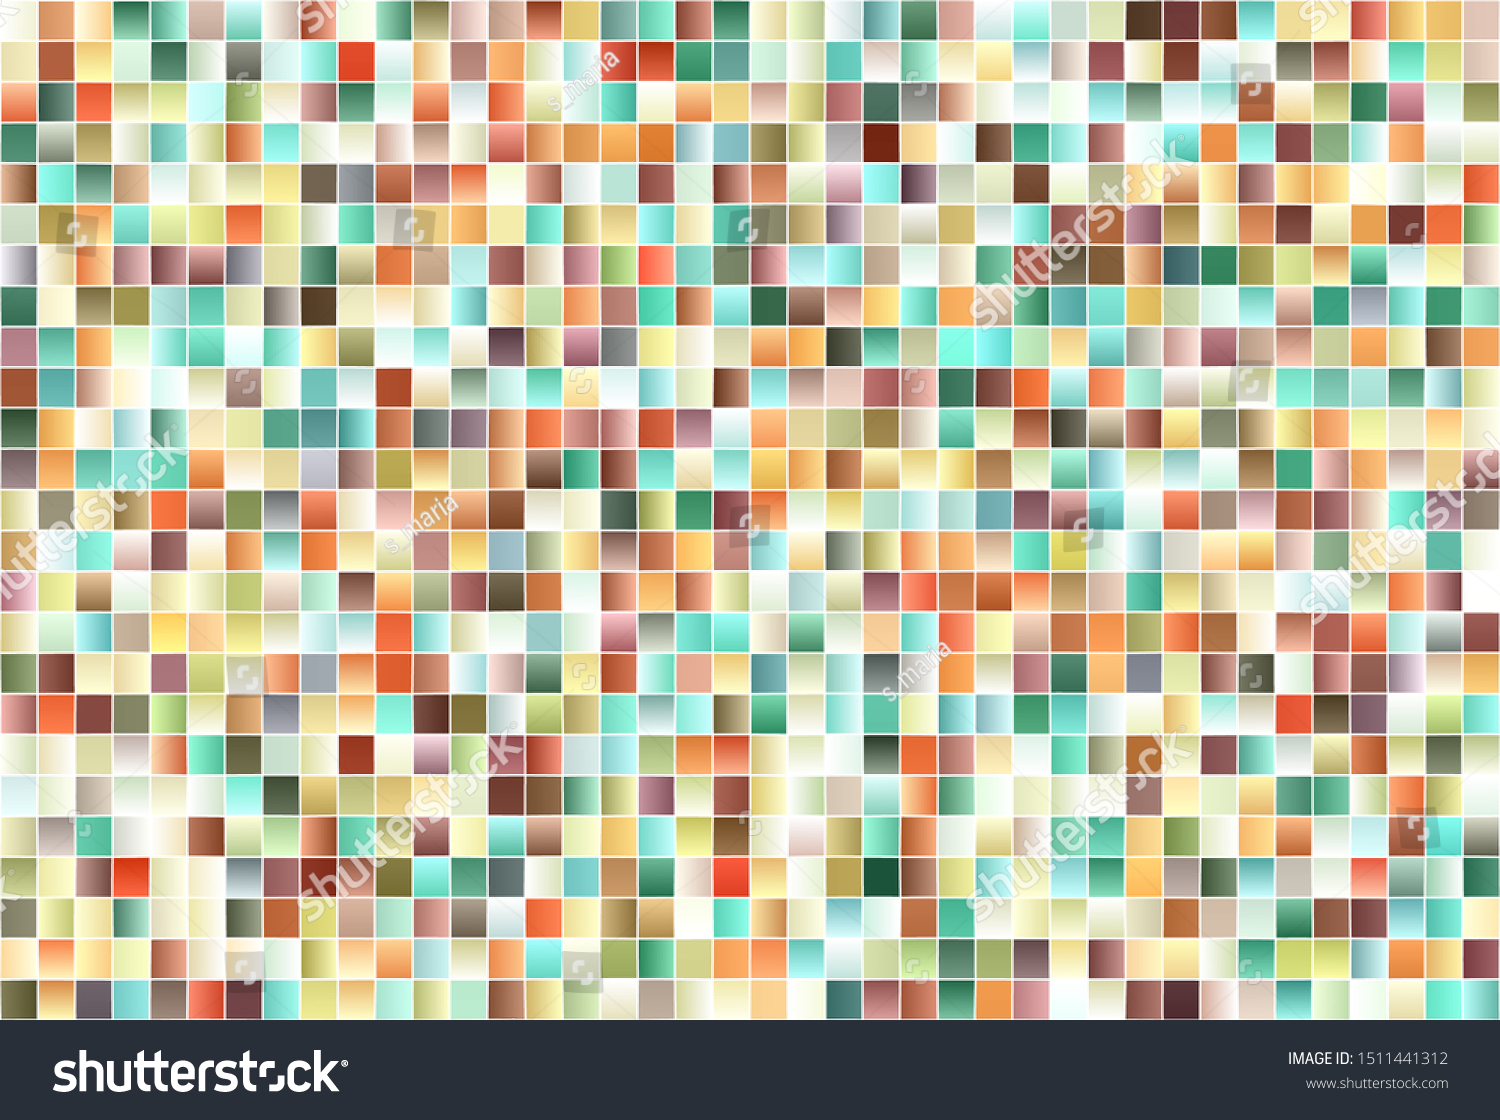 stock-vector-light-multicolor-vector-pattern-in-square-style-modern-abstract-illustration-with-colorful-1511441312